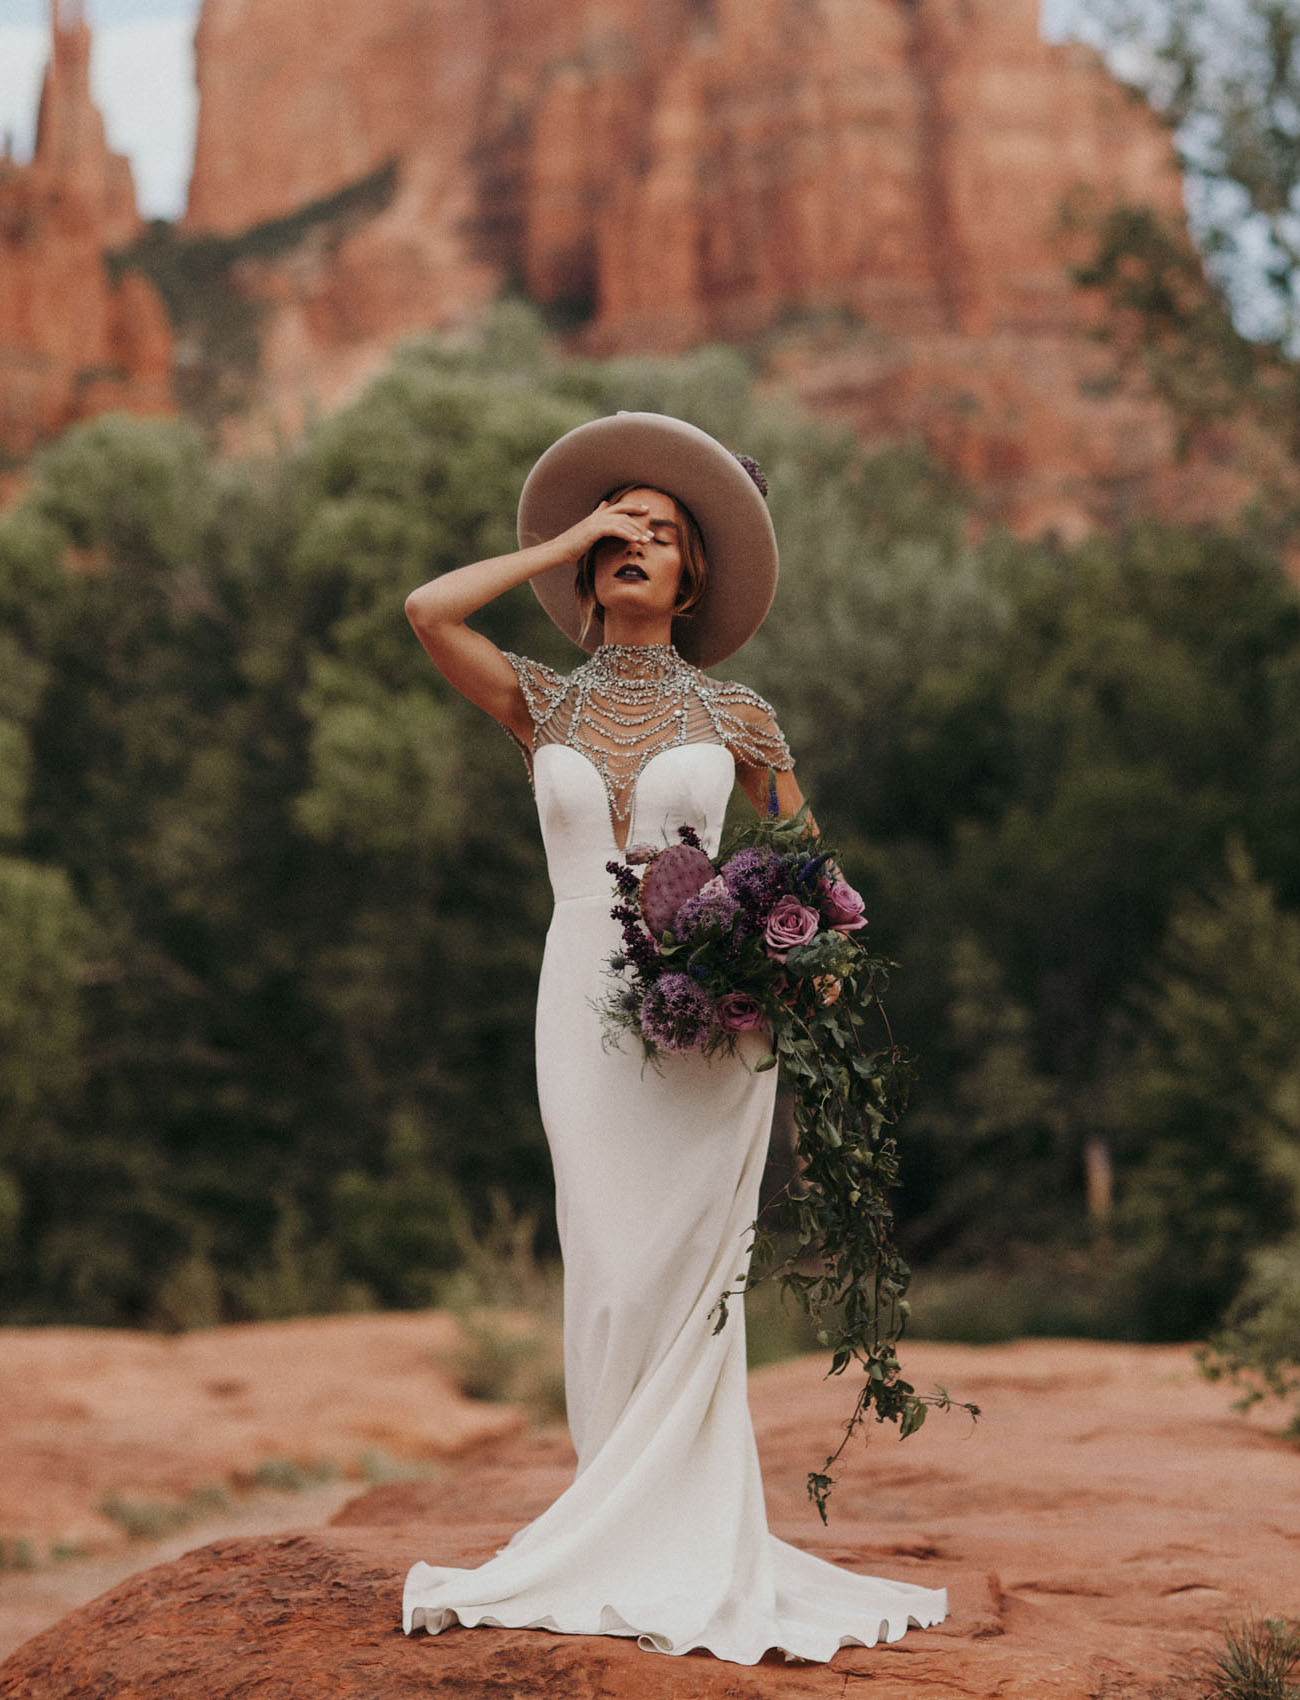 Bridal Trend with Hats